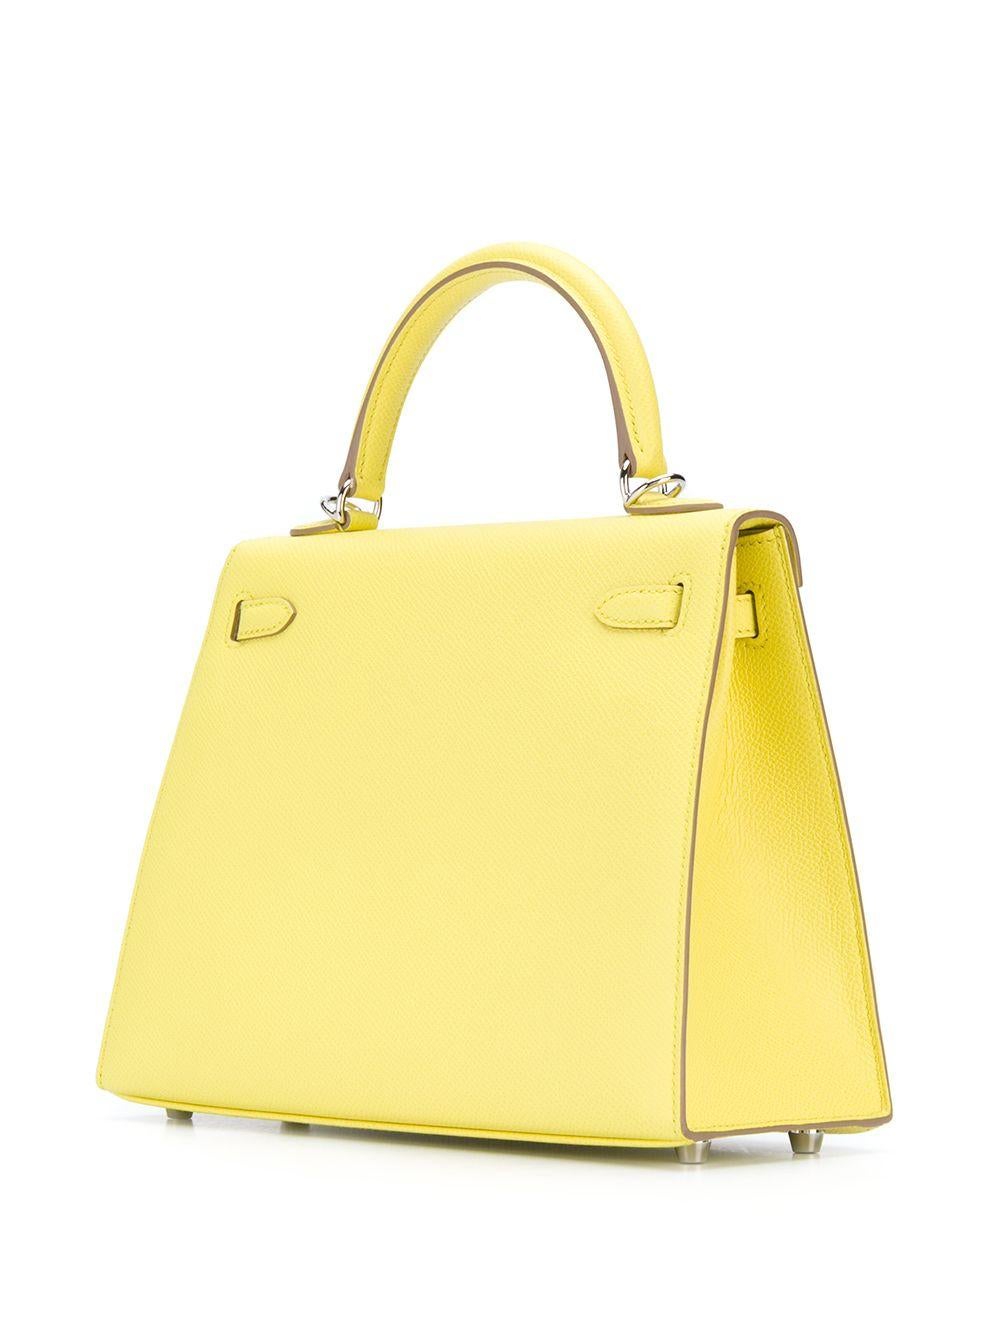 In a highly sought-after compact size, this Hermès Candy Kelly 25 bag makes an irresistibly feminine statement. Expertly crafted in France from a supple lime green epsom leather, hand stitched by skilled craftsmen in a contrasting white and